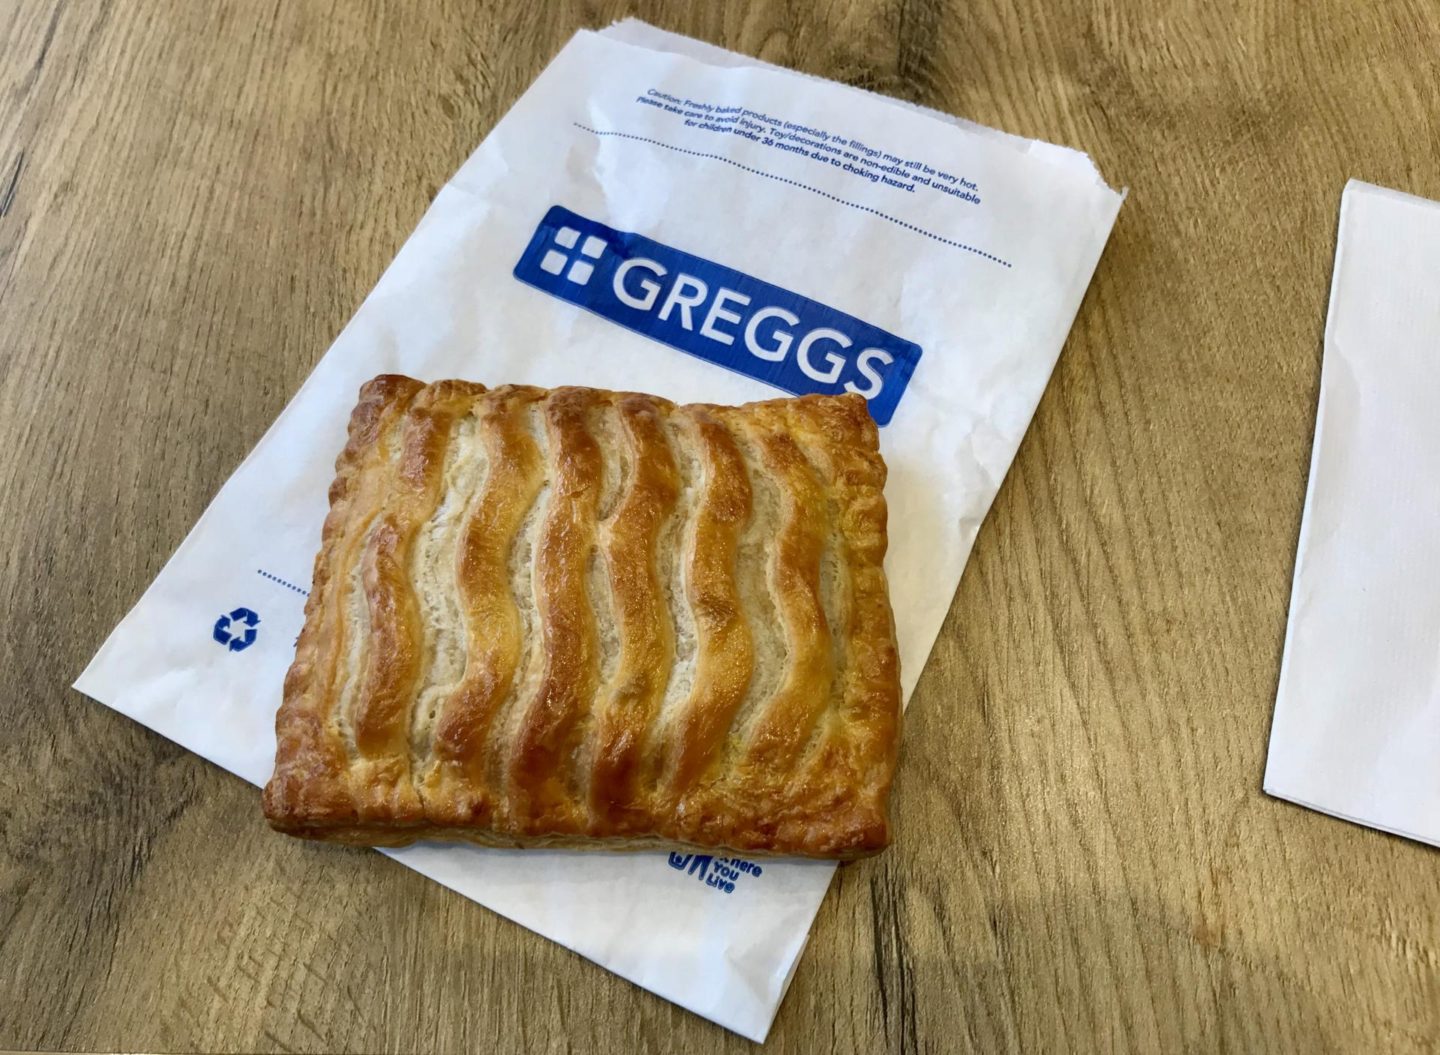 A LOVE LETTER TO THE GREGGS CHICKEN BAKE